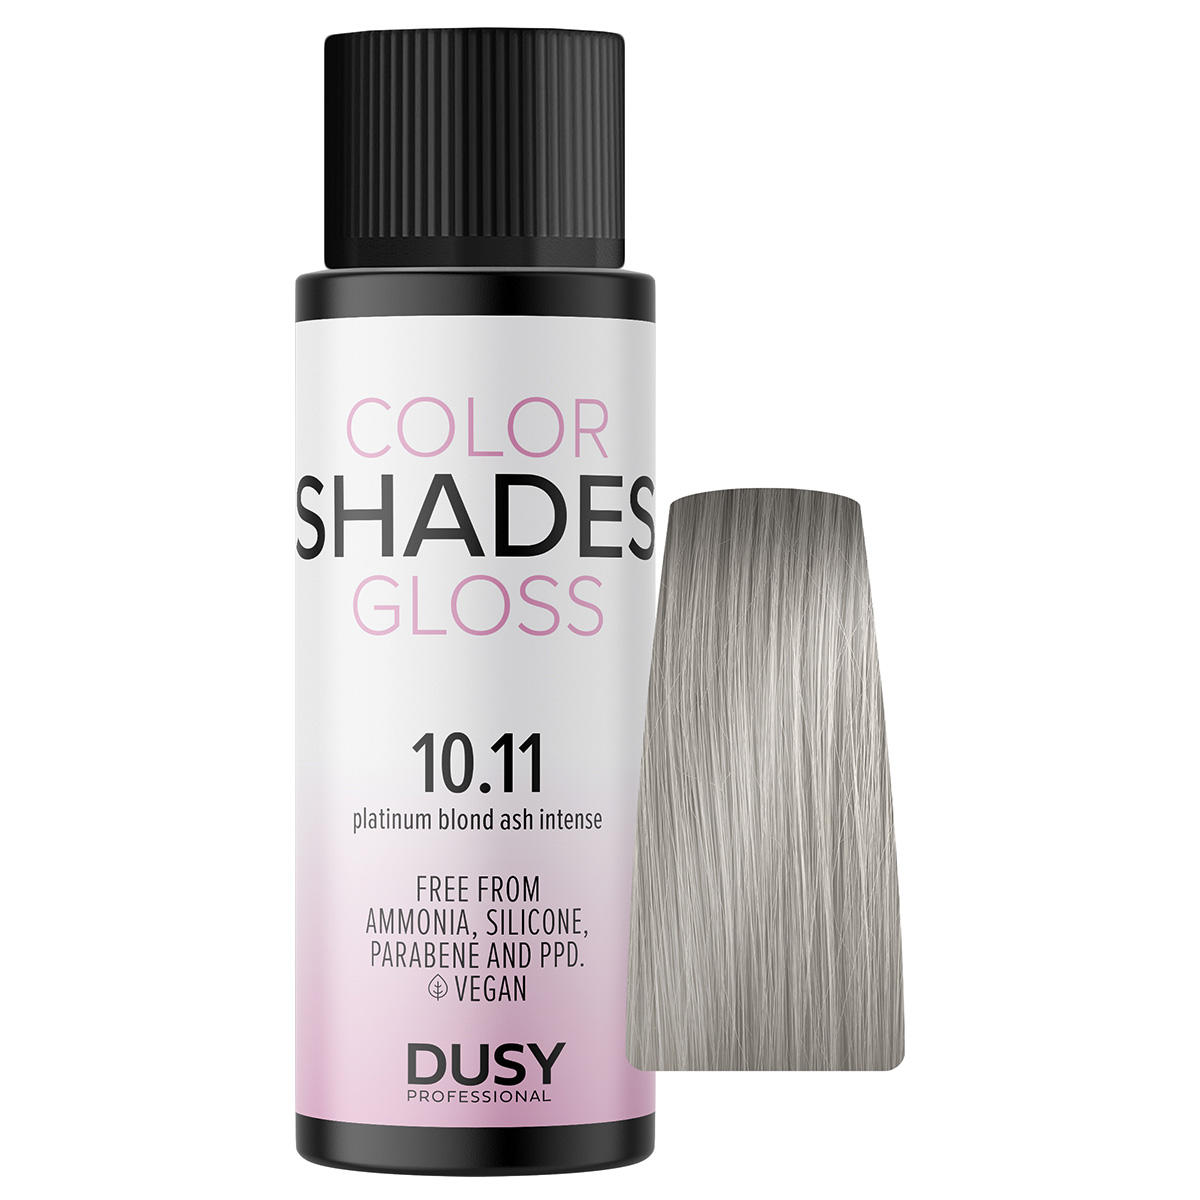 dusy professional Color Shades Gloss 10.11 Platin Blond Asch Intensiv 60 ml - 2